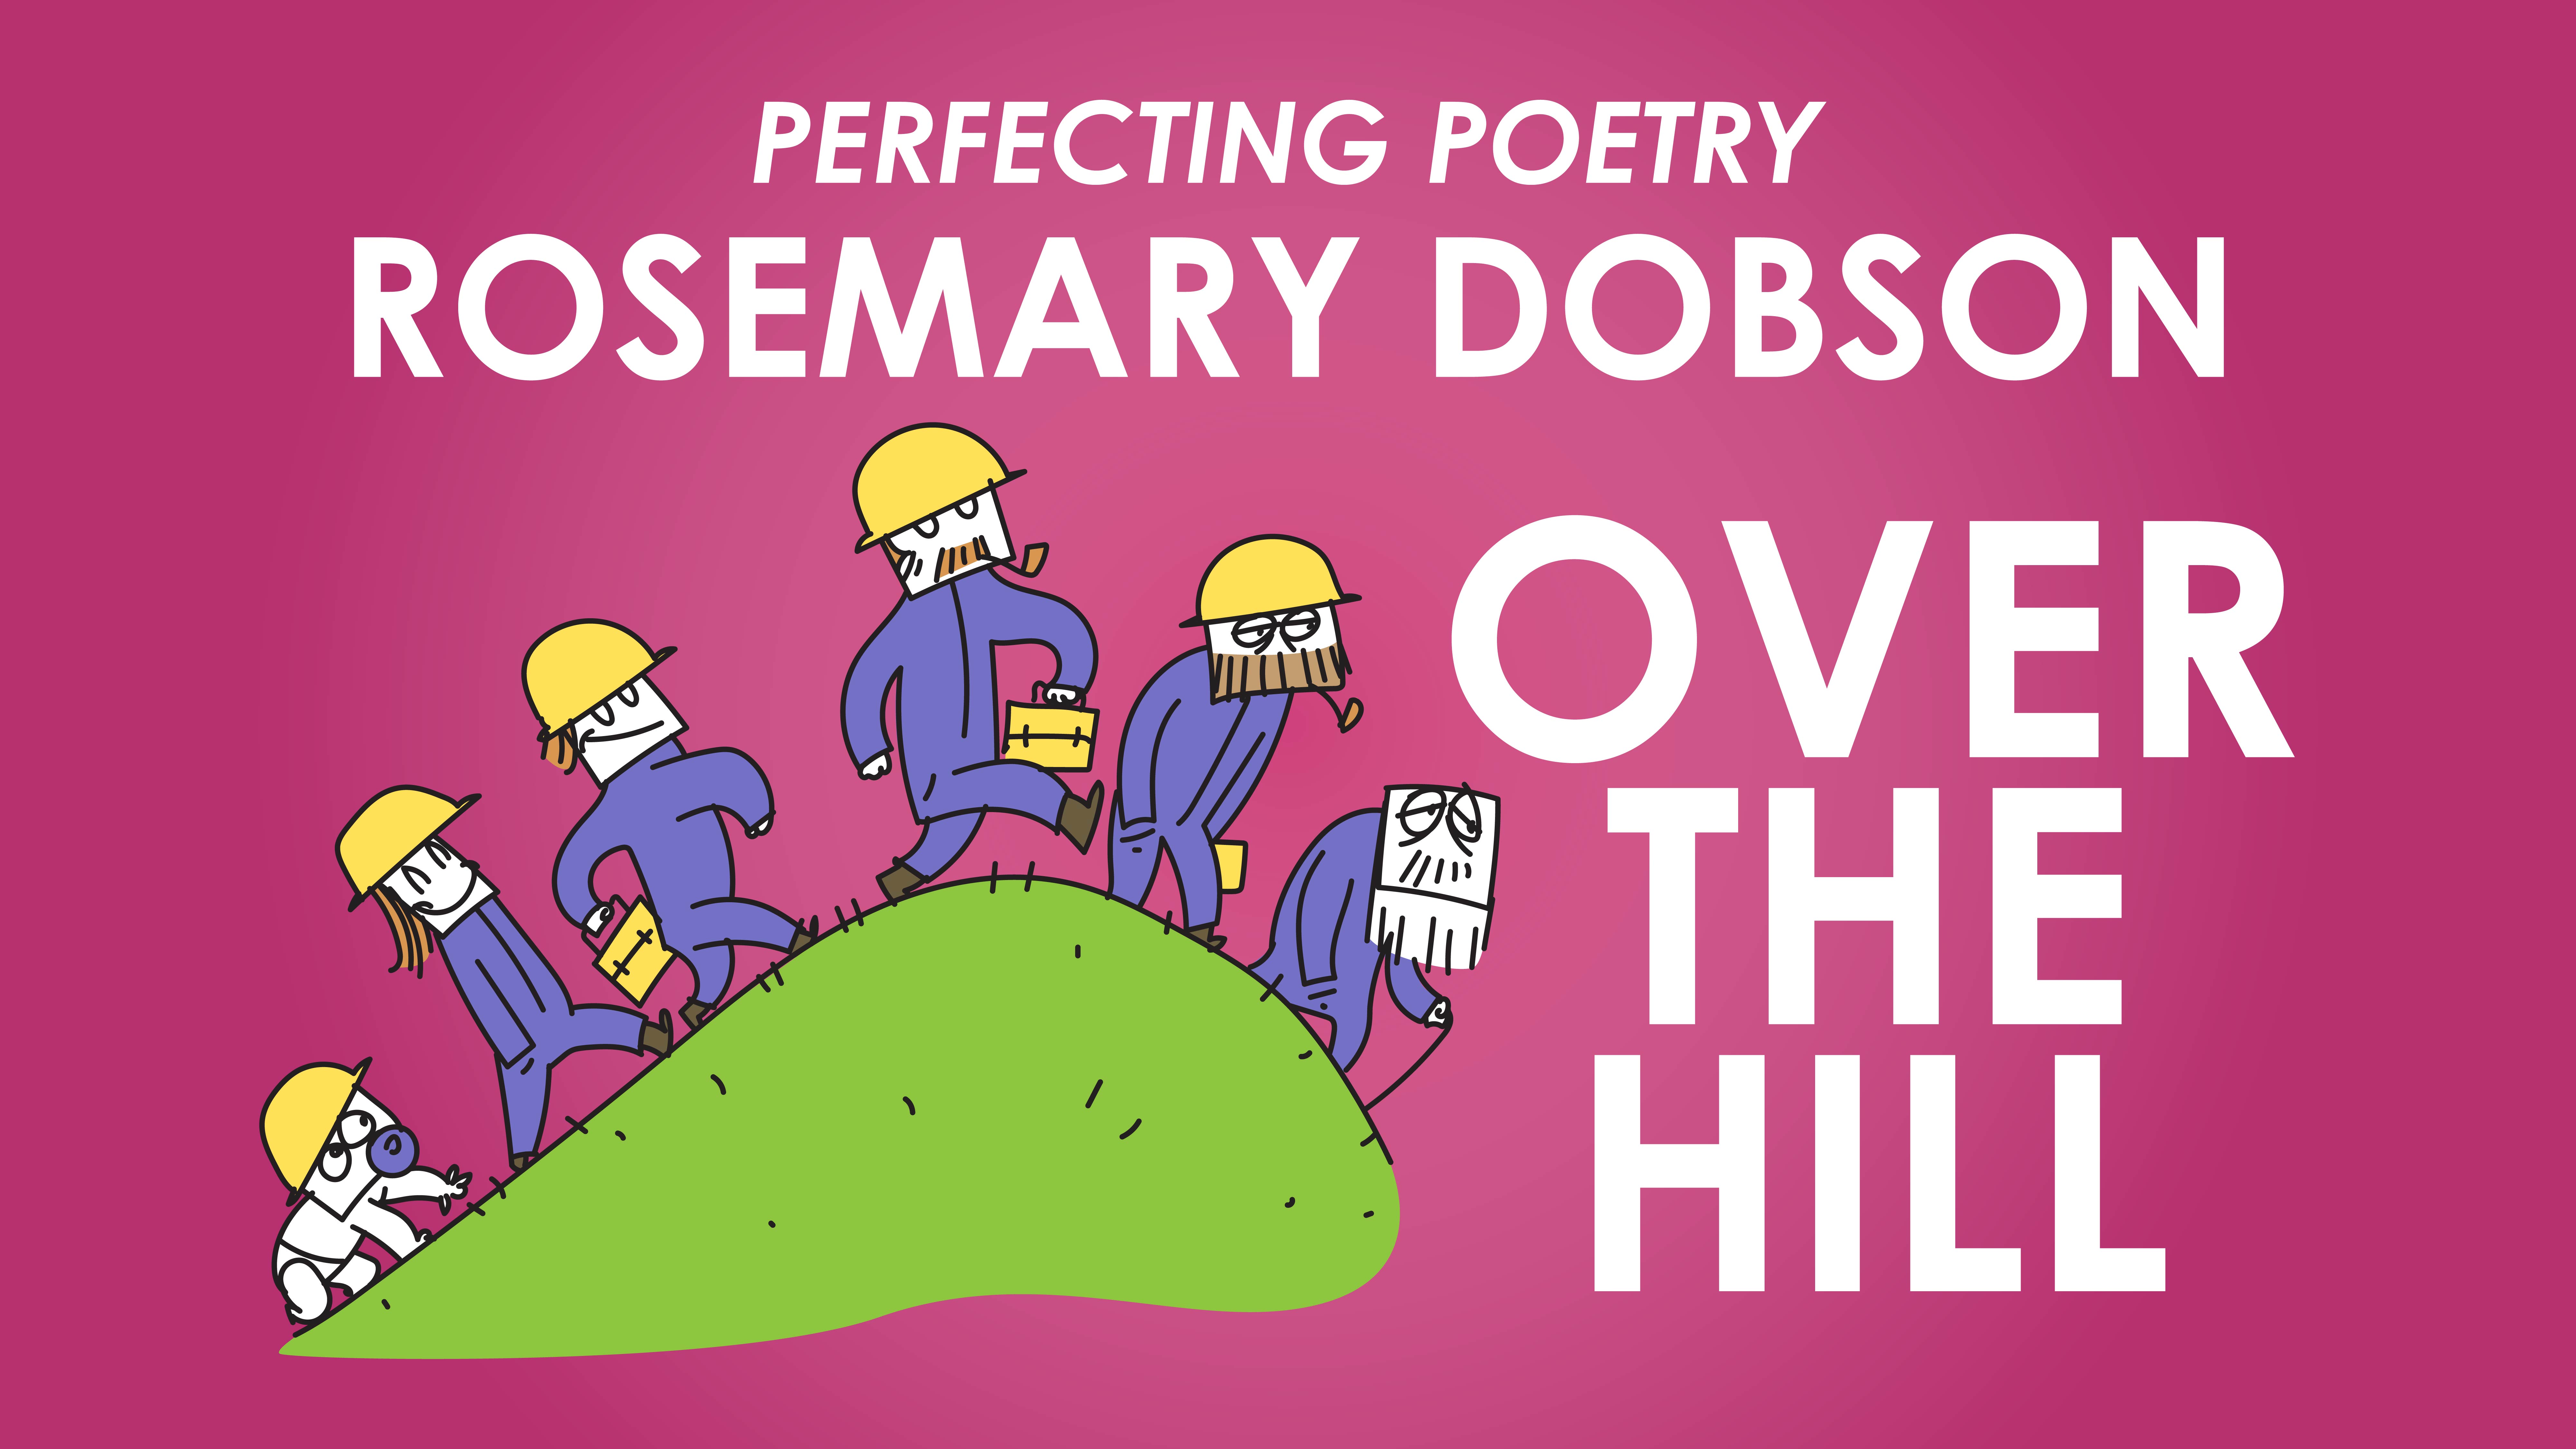 Over The Hill - Rosemary Dobson - Perfecting Poetry 